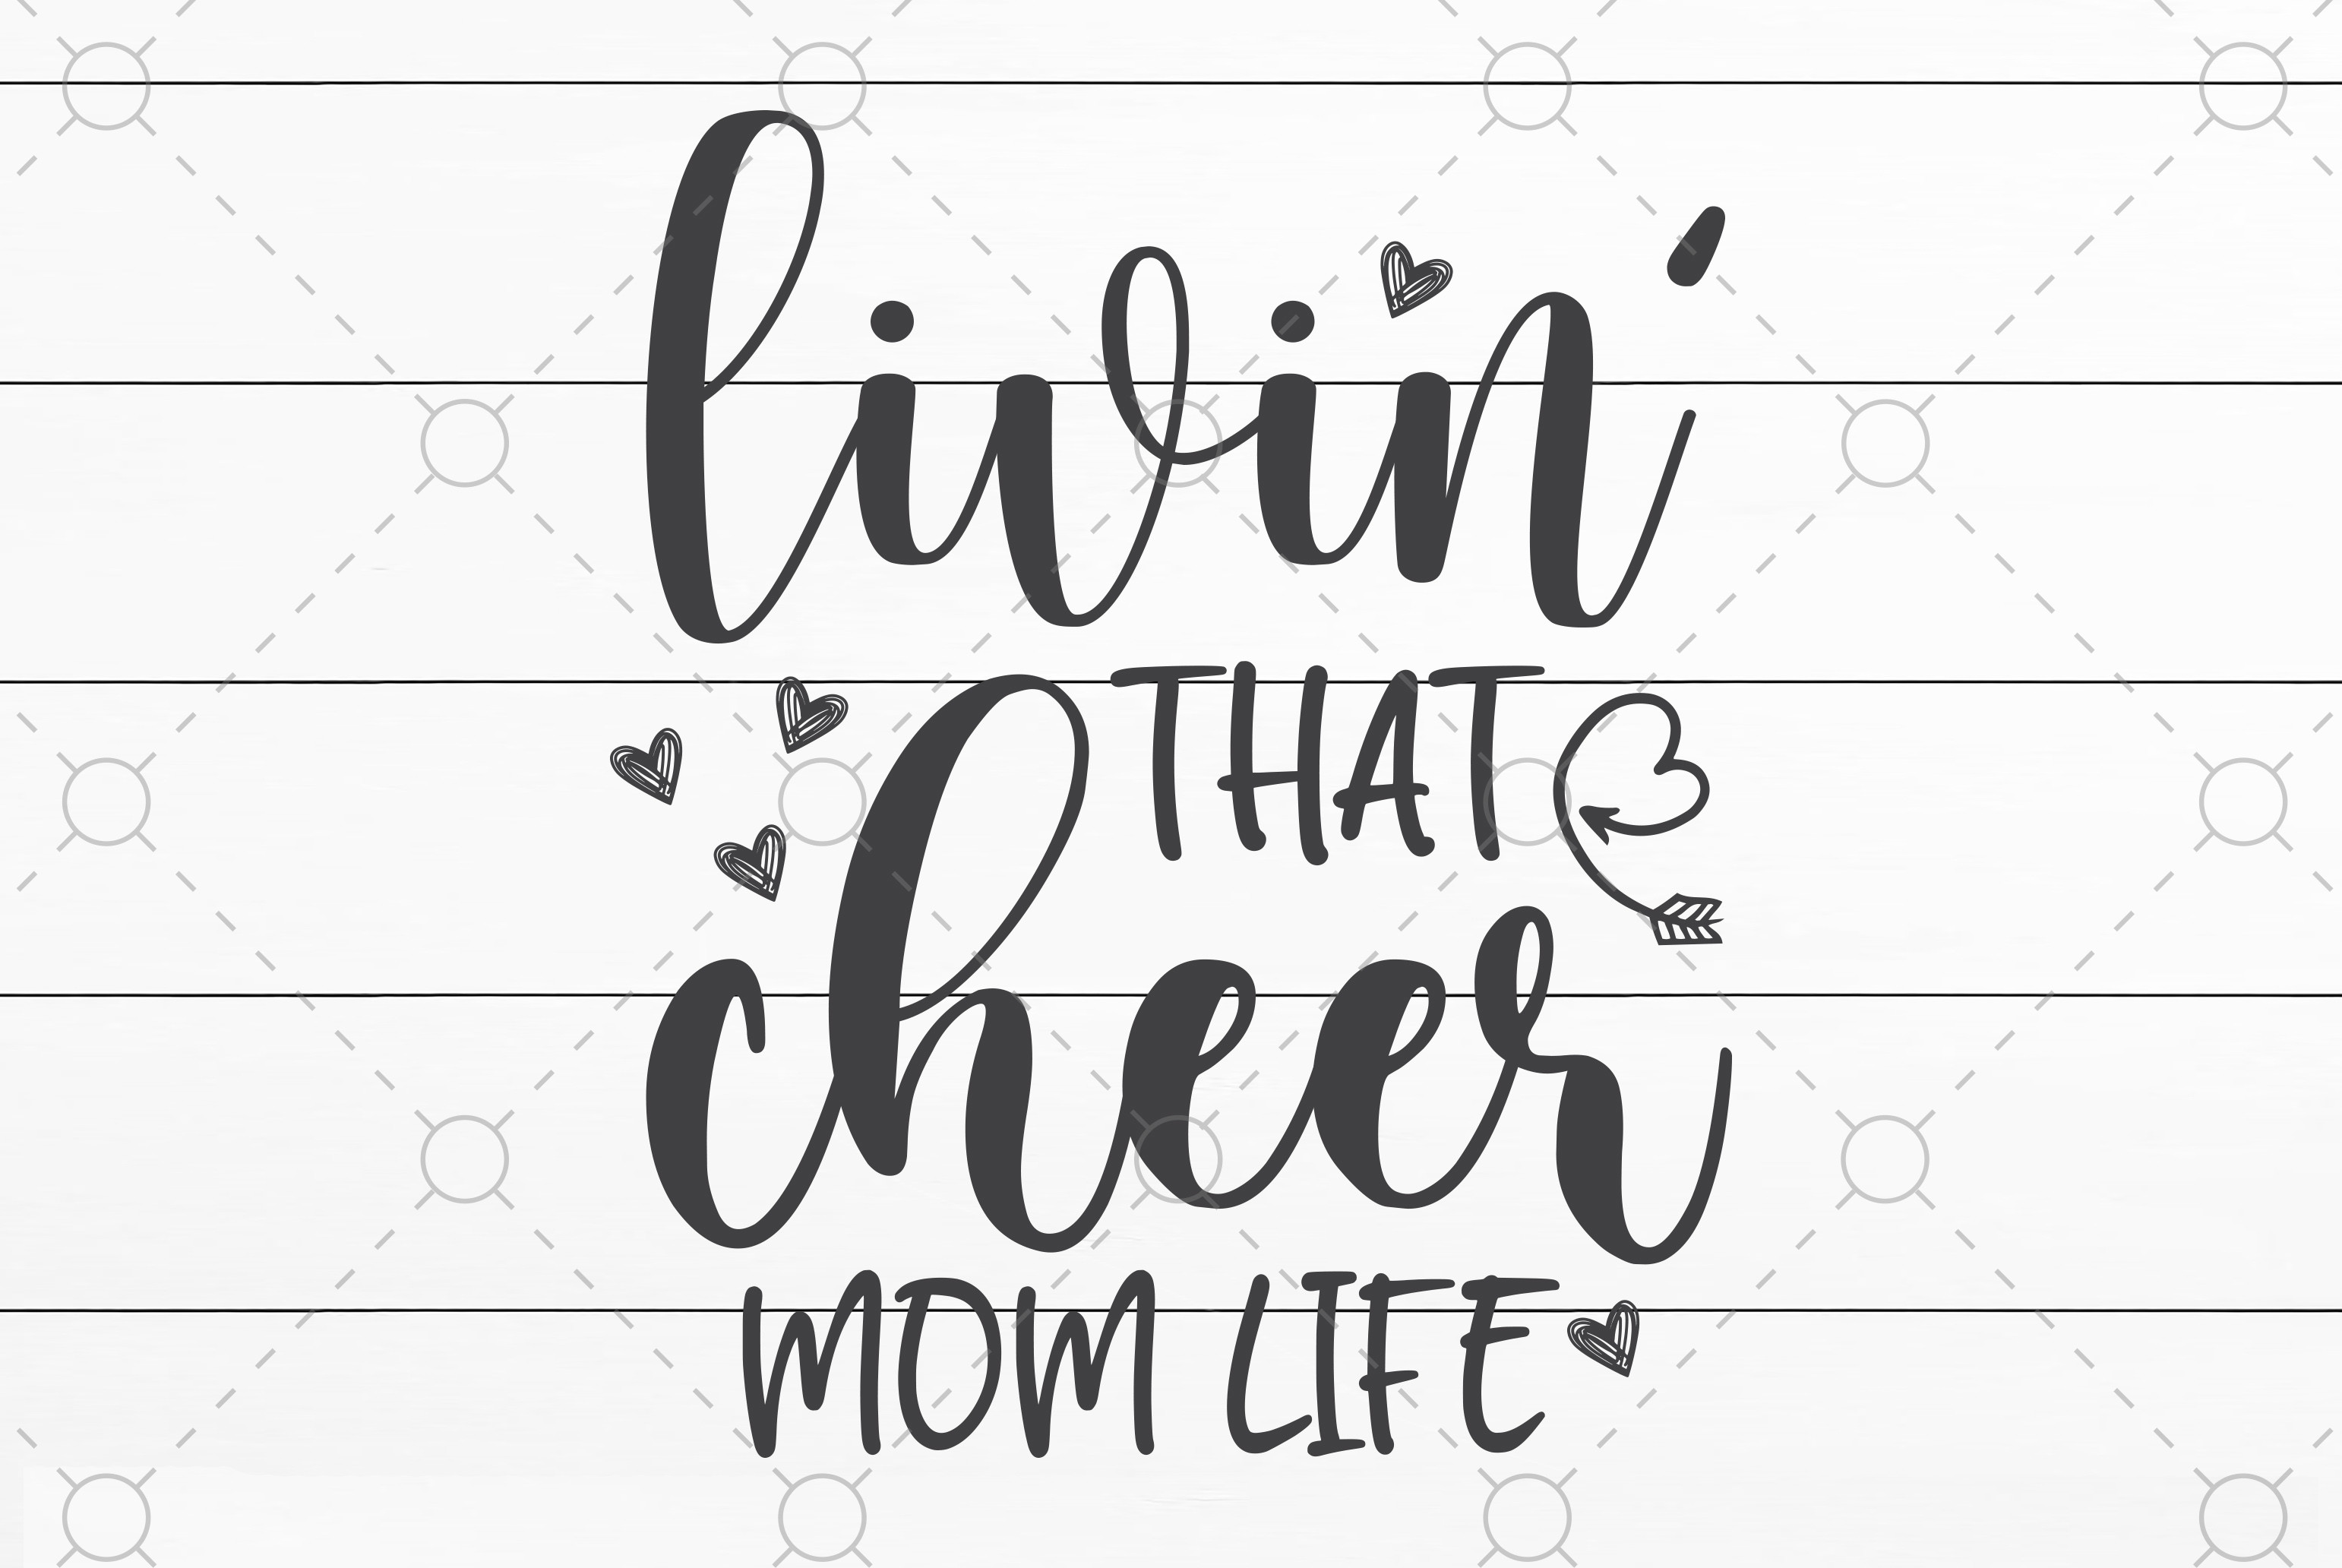 Livin' That Cheer Mom Life Graphic by CraftartSVG · Creative Fabrica